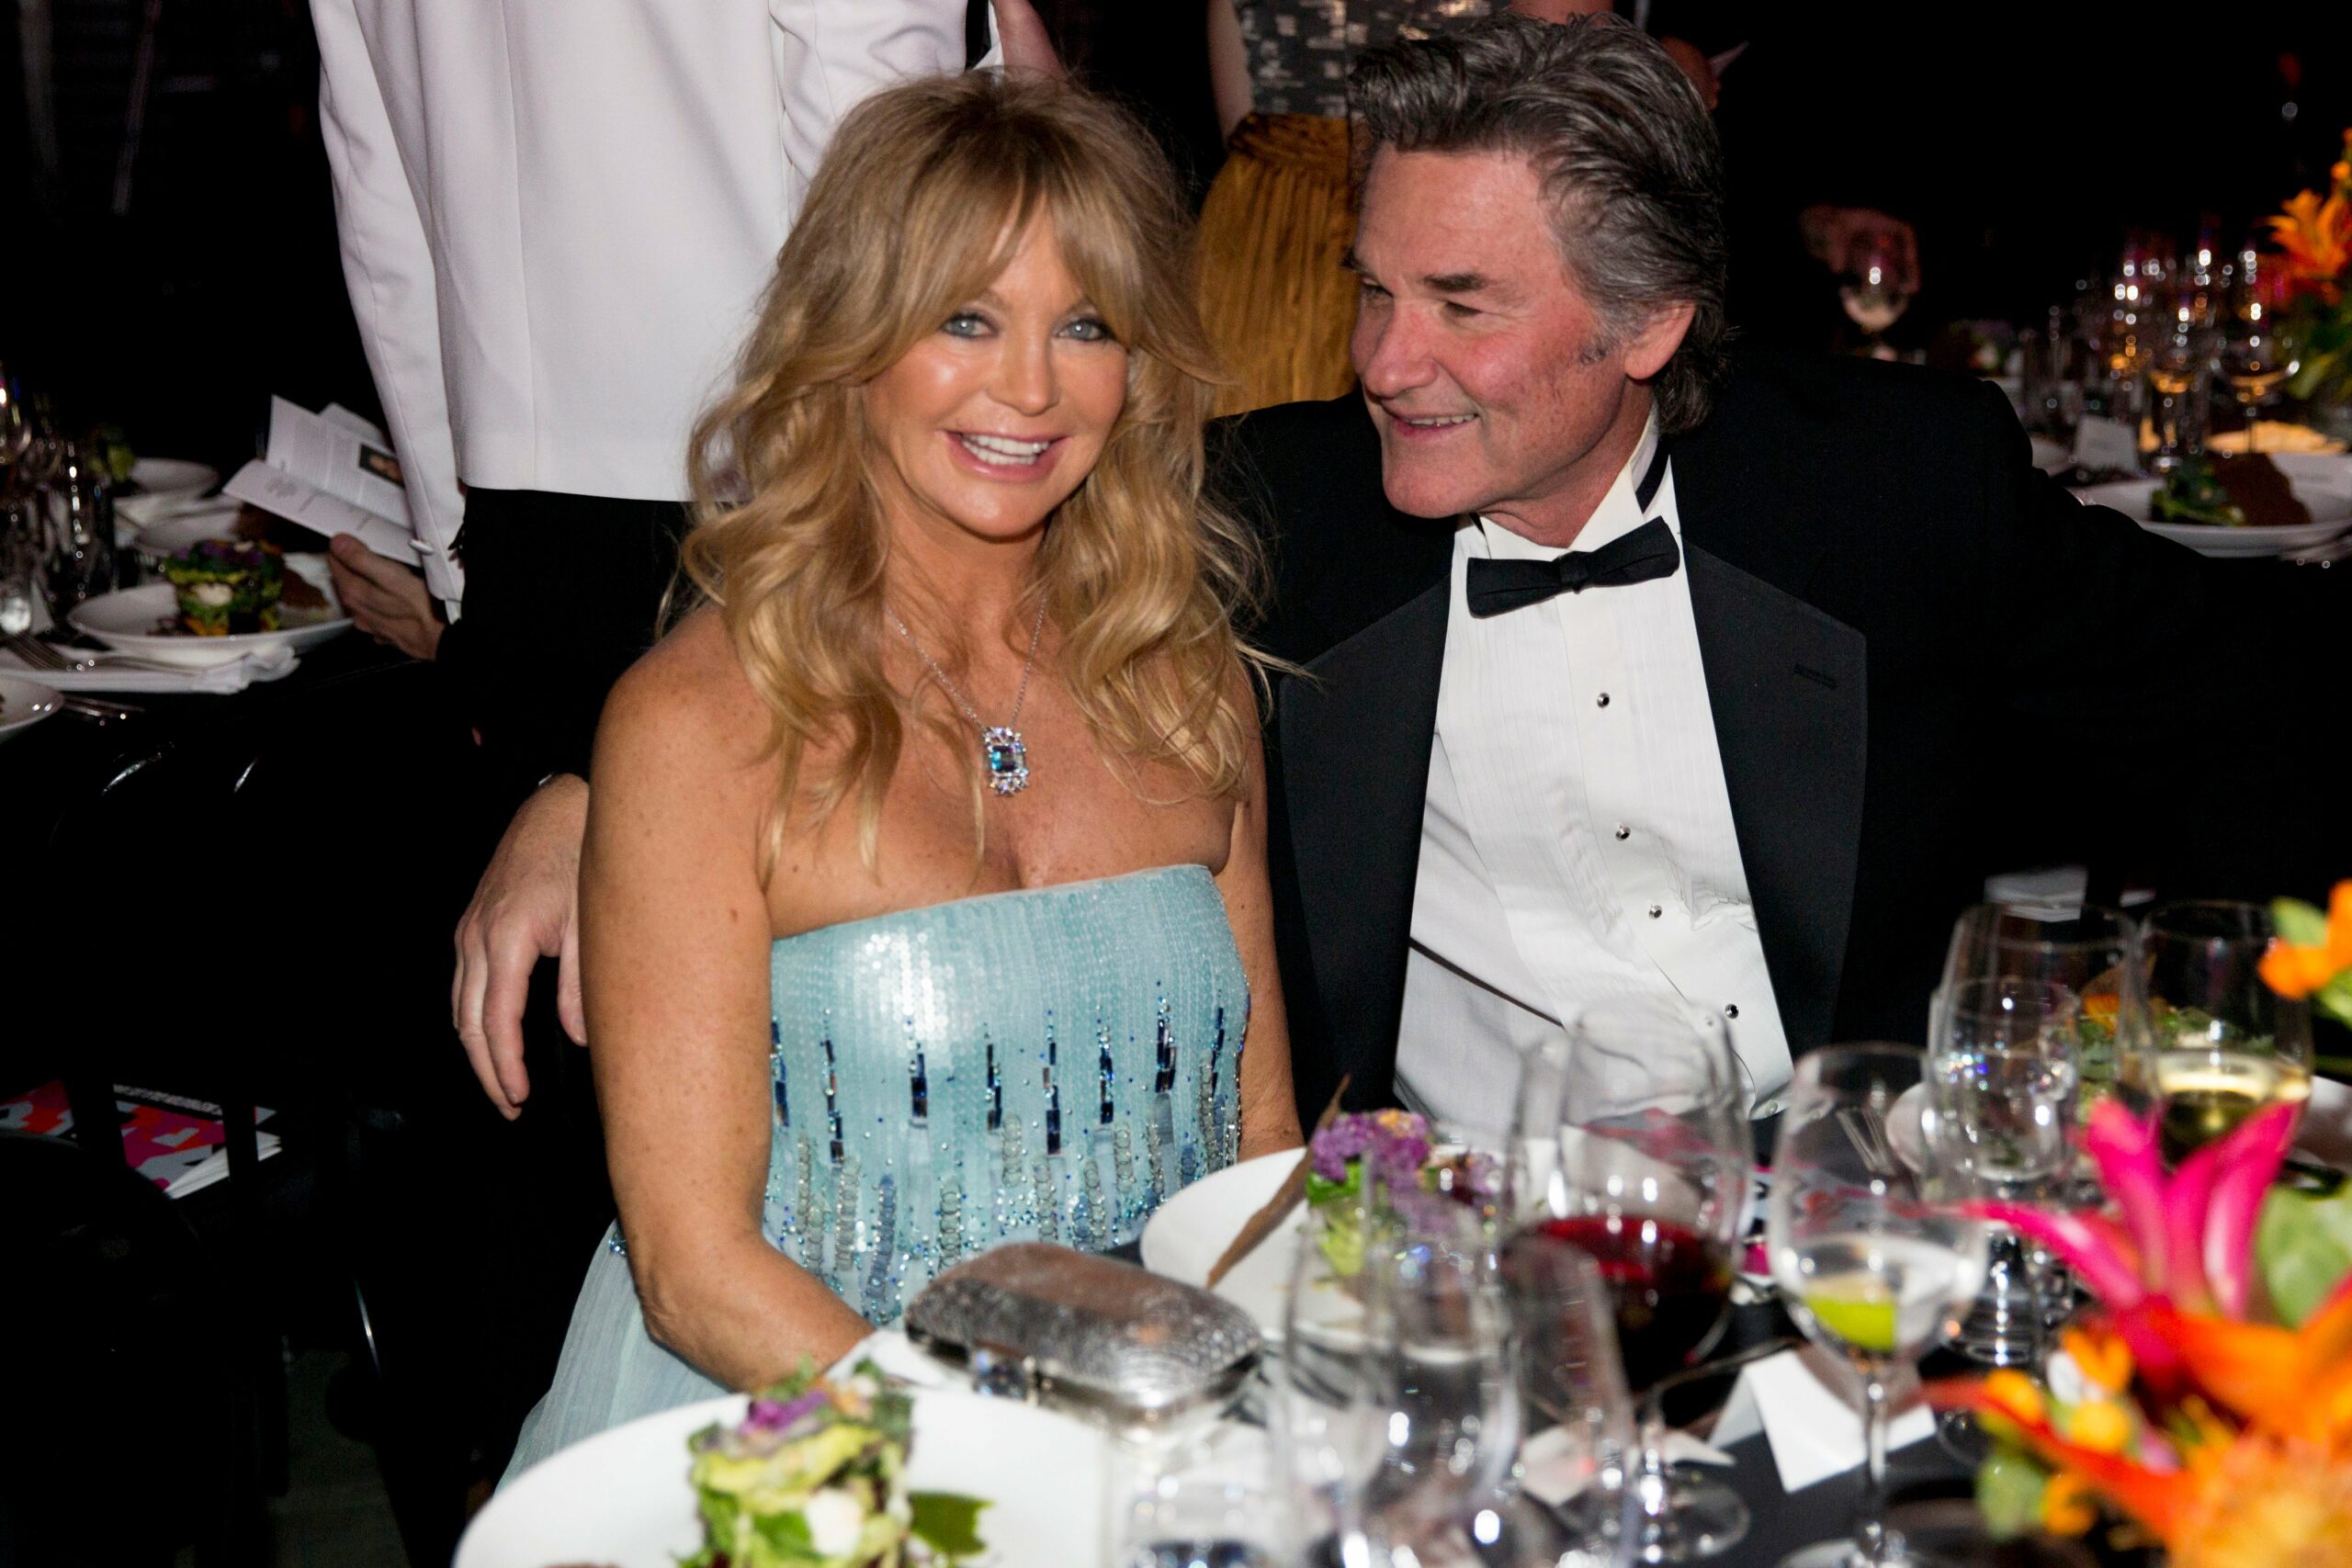 Who is worth more Goldie Hawn or Kurt Russell?